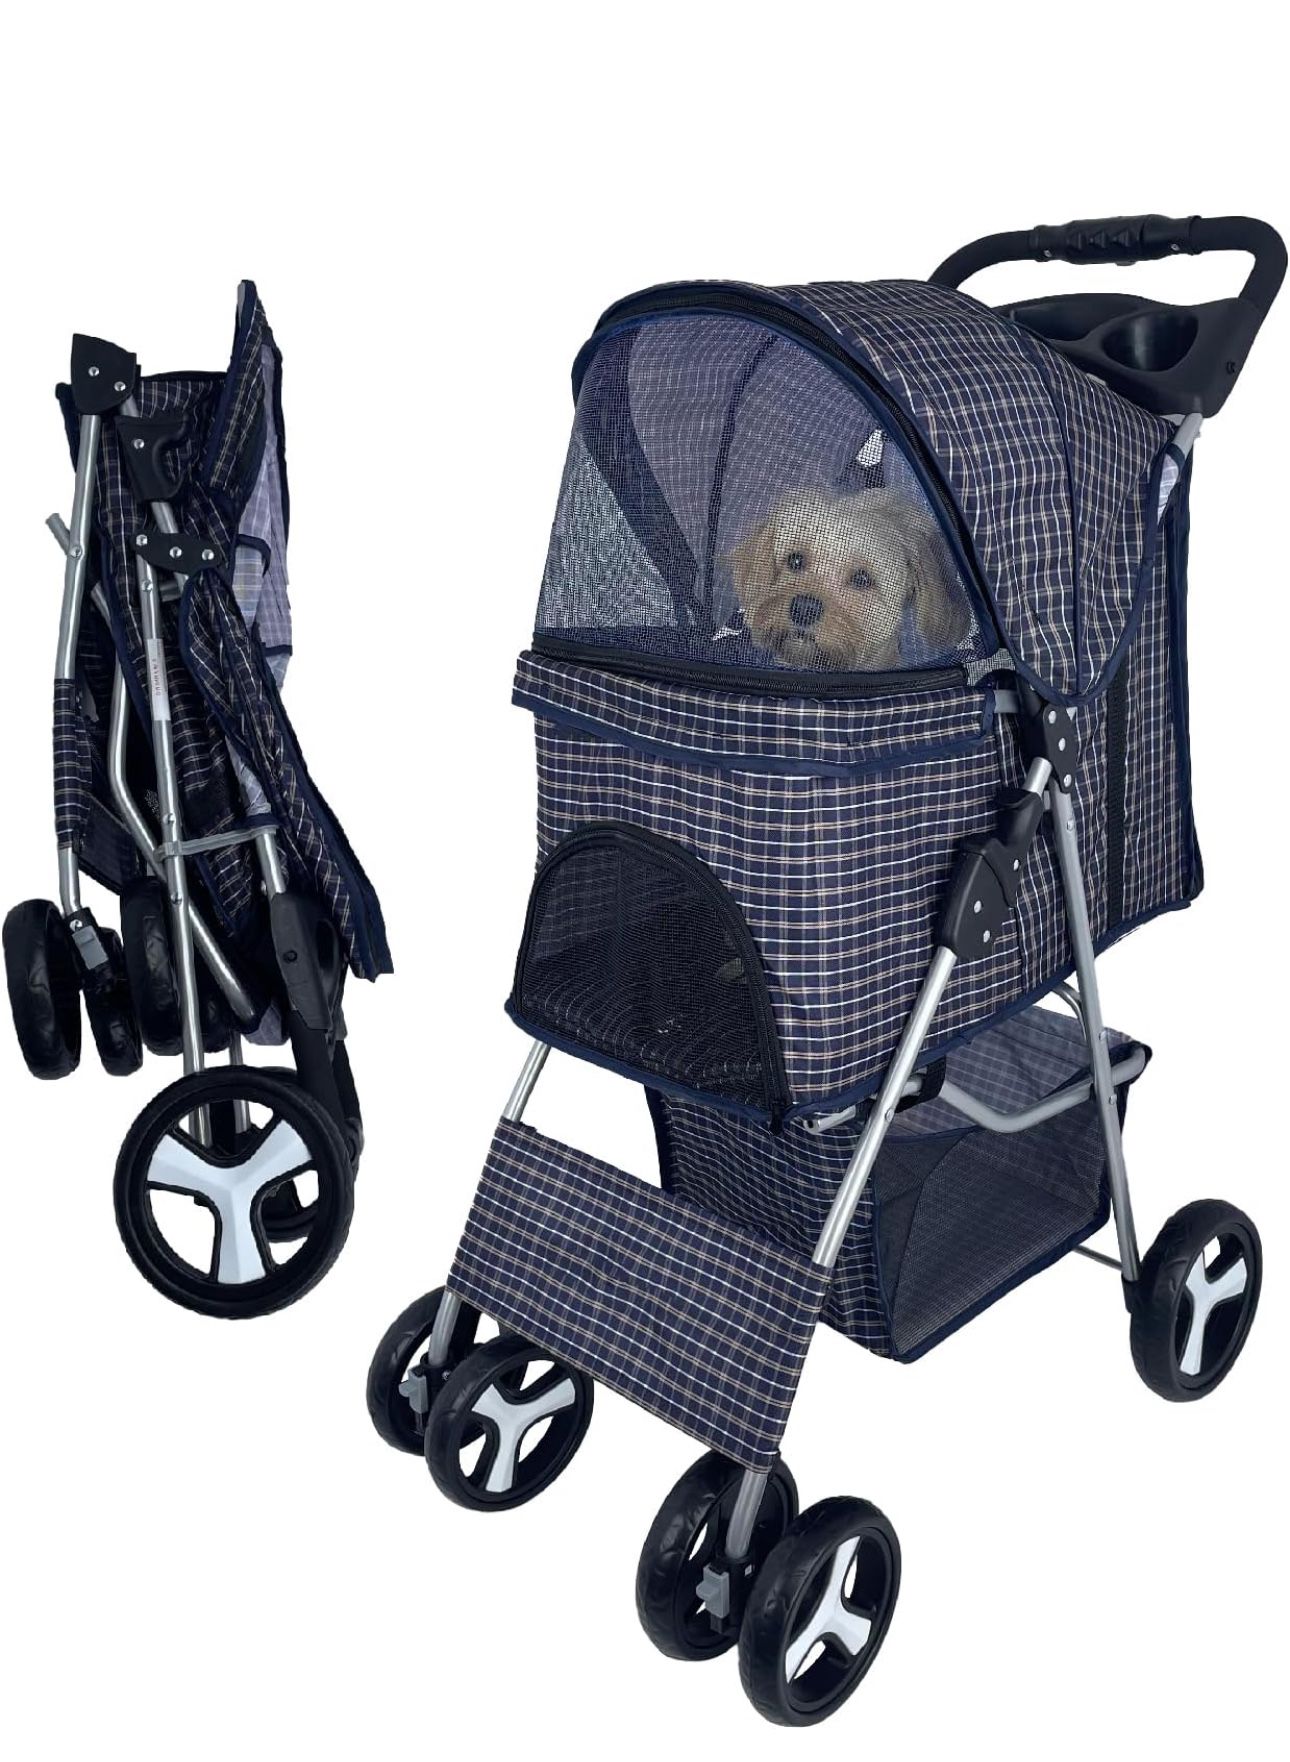 Small dog Stroller, Pet Stroller for Small Dogs Cats with Storage Basket Cup Holder, up to 33lbs (Plaid)